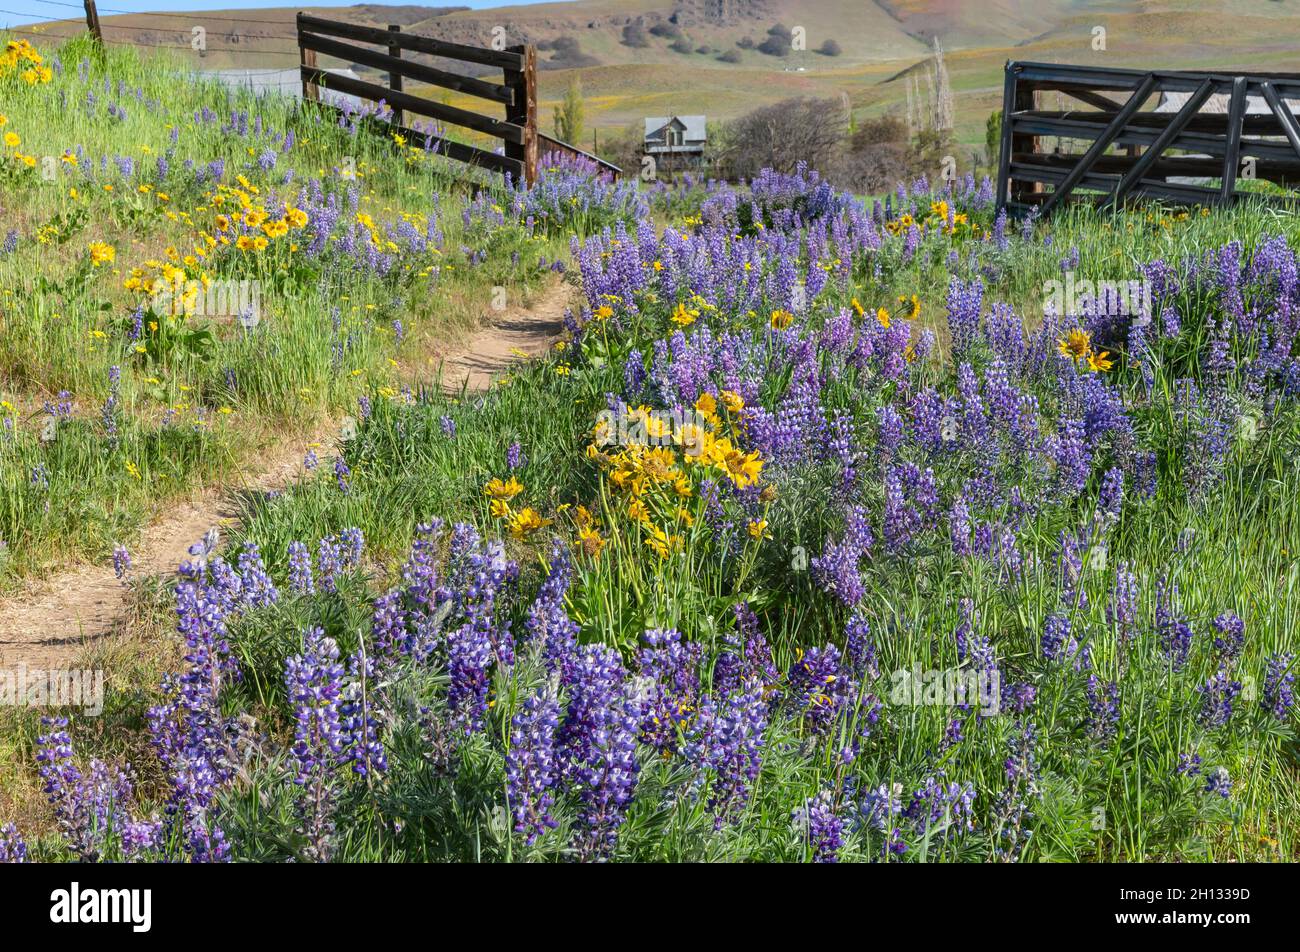 WA19660-00...WASHINGTON - Lupine and balsamroot blooming in an open meadow at historic Dalles Mountain Ranch, Columbia Hills State Park. Stock Photo